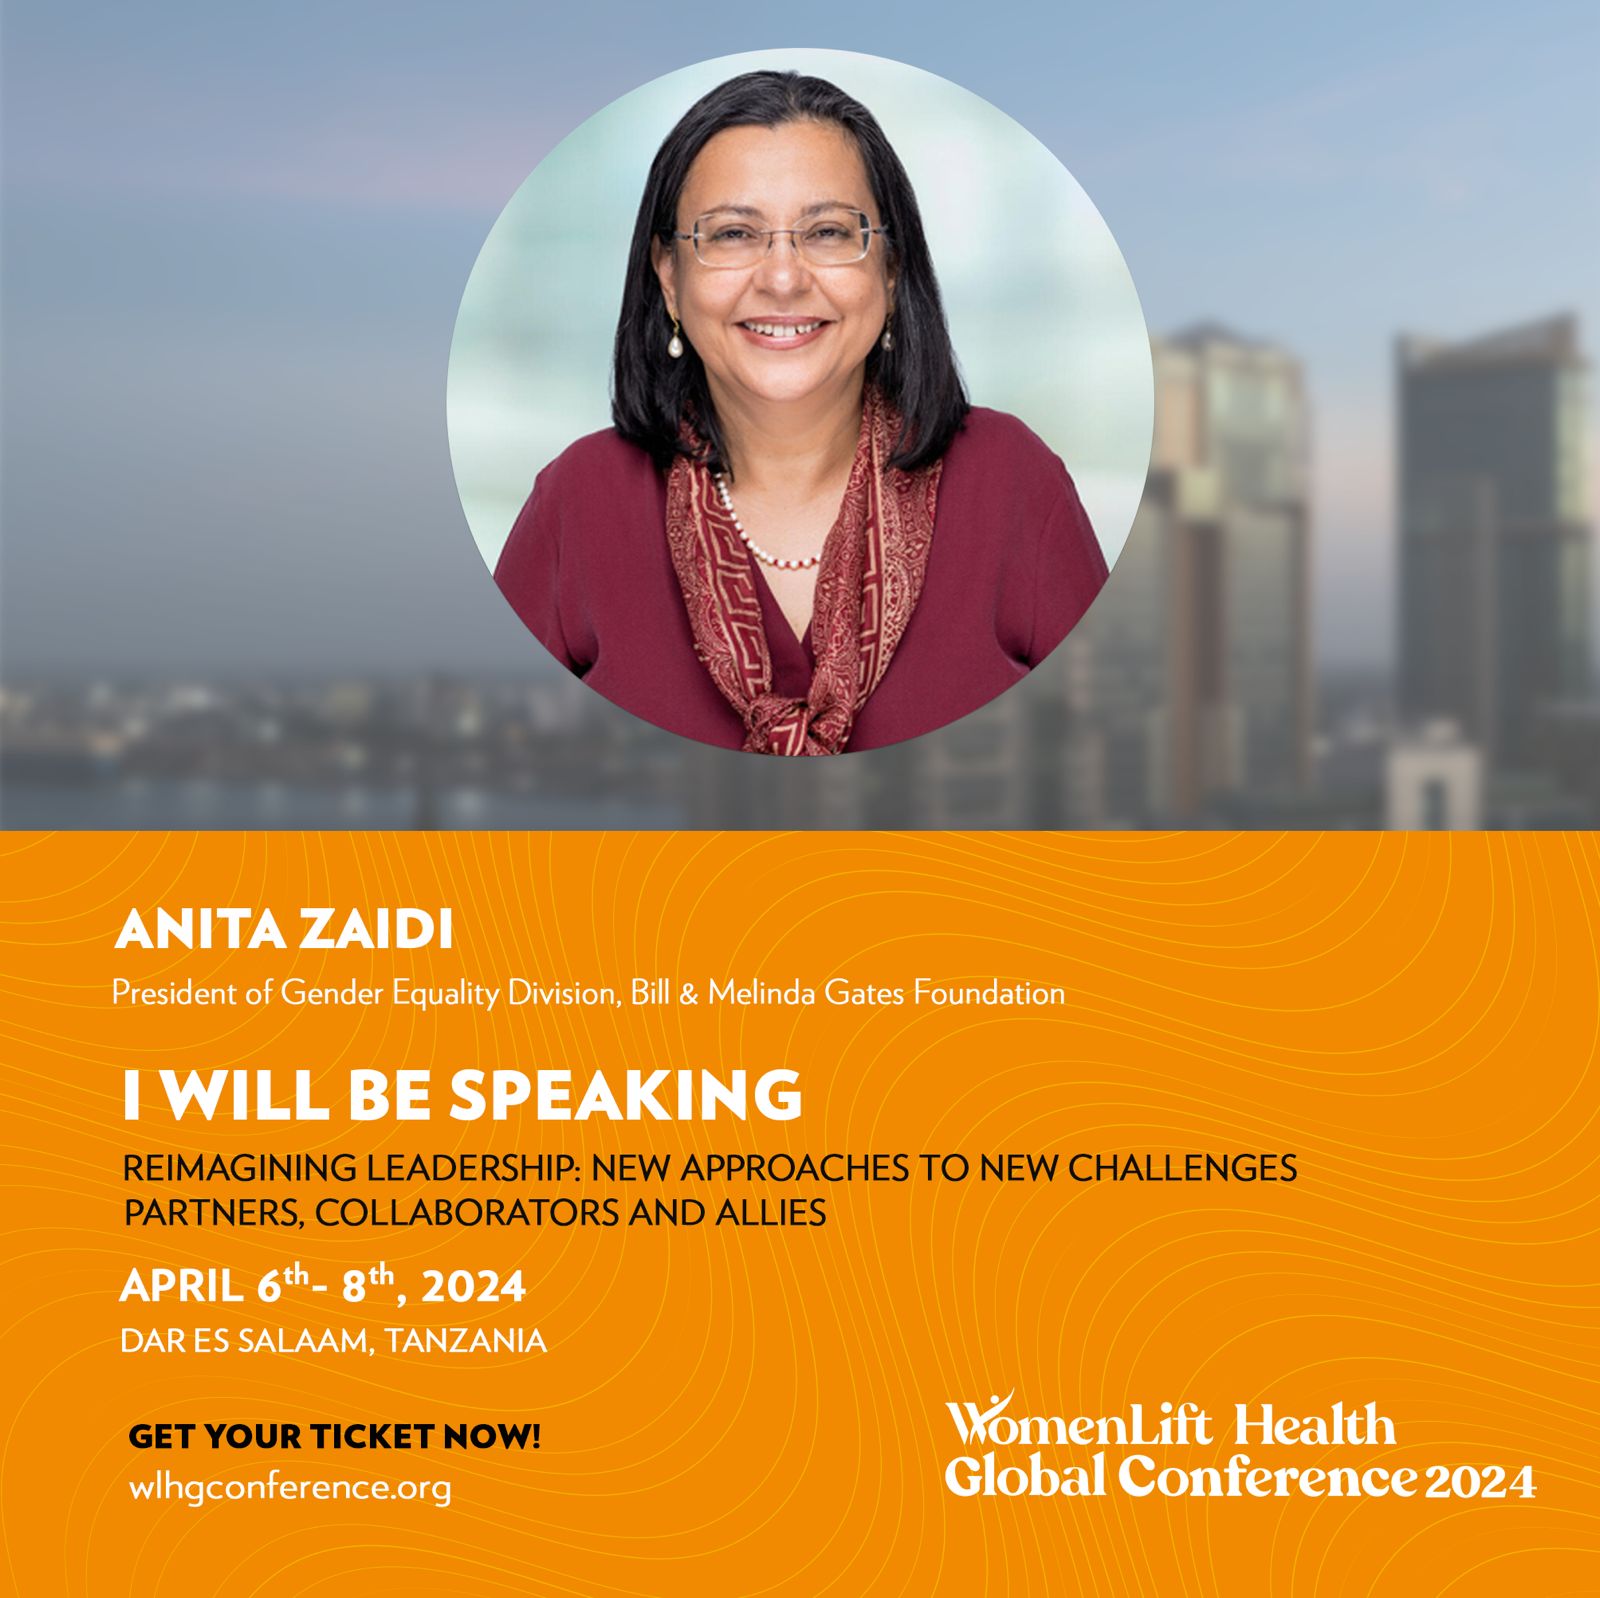 Anita Zaidi will be speaking at the WomenLift Health Global Conference 2024